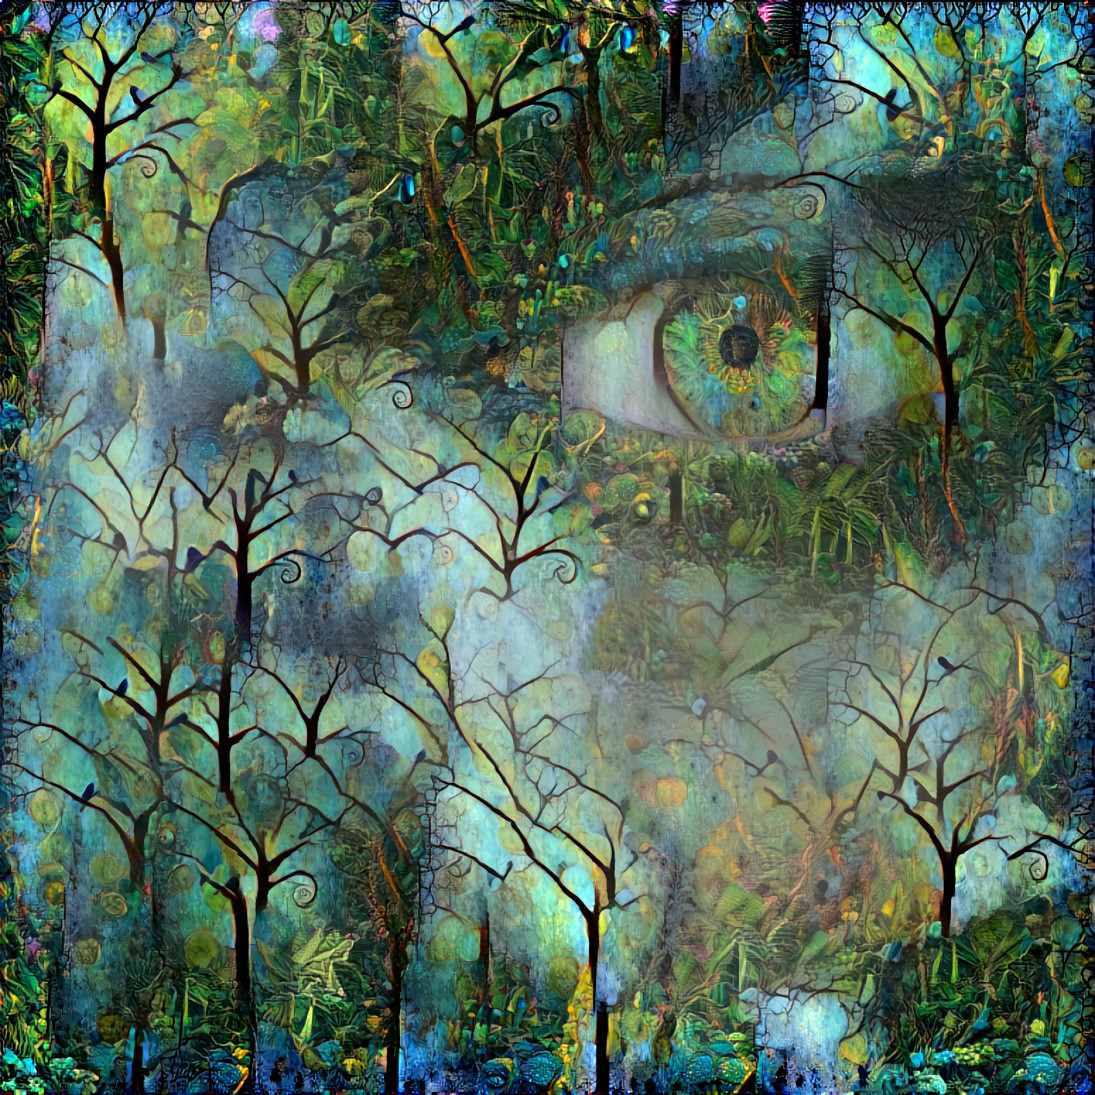 She lives in the forest